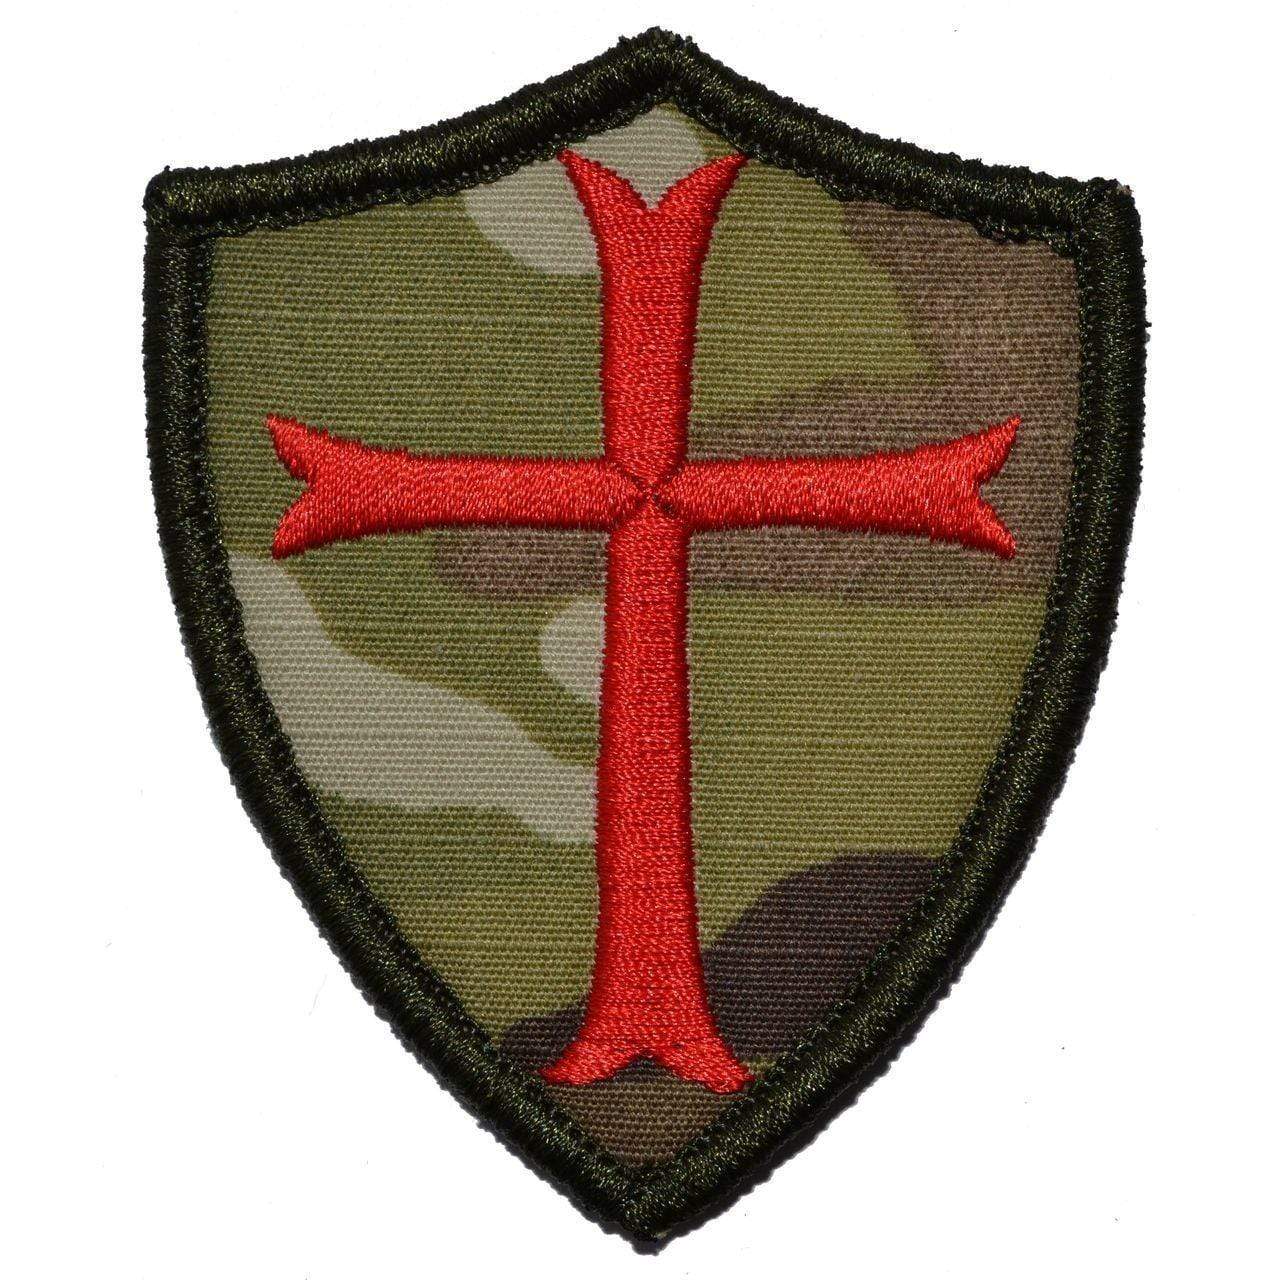 Tactical Gear Junkie Patches MultiCam Knights Templar - 2.5x3 Shield Patch